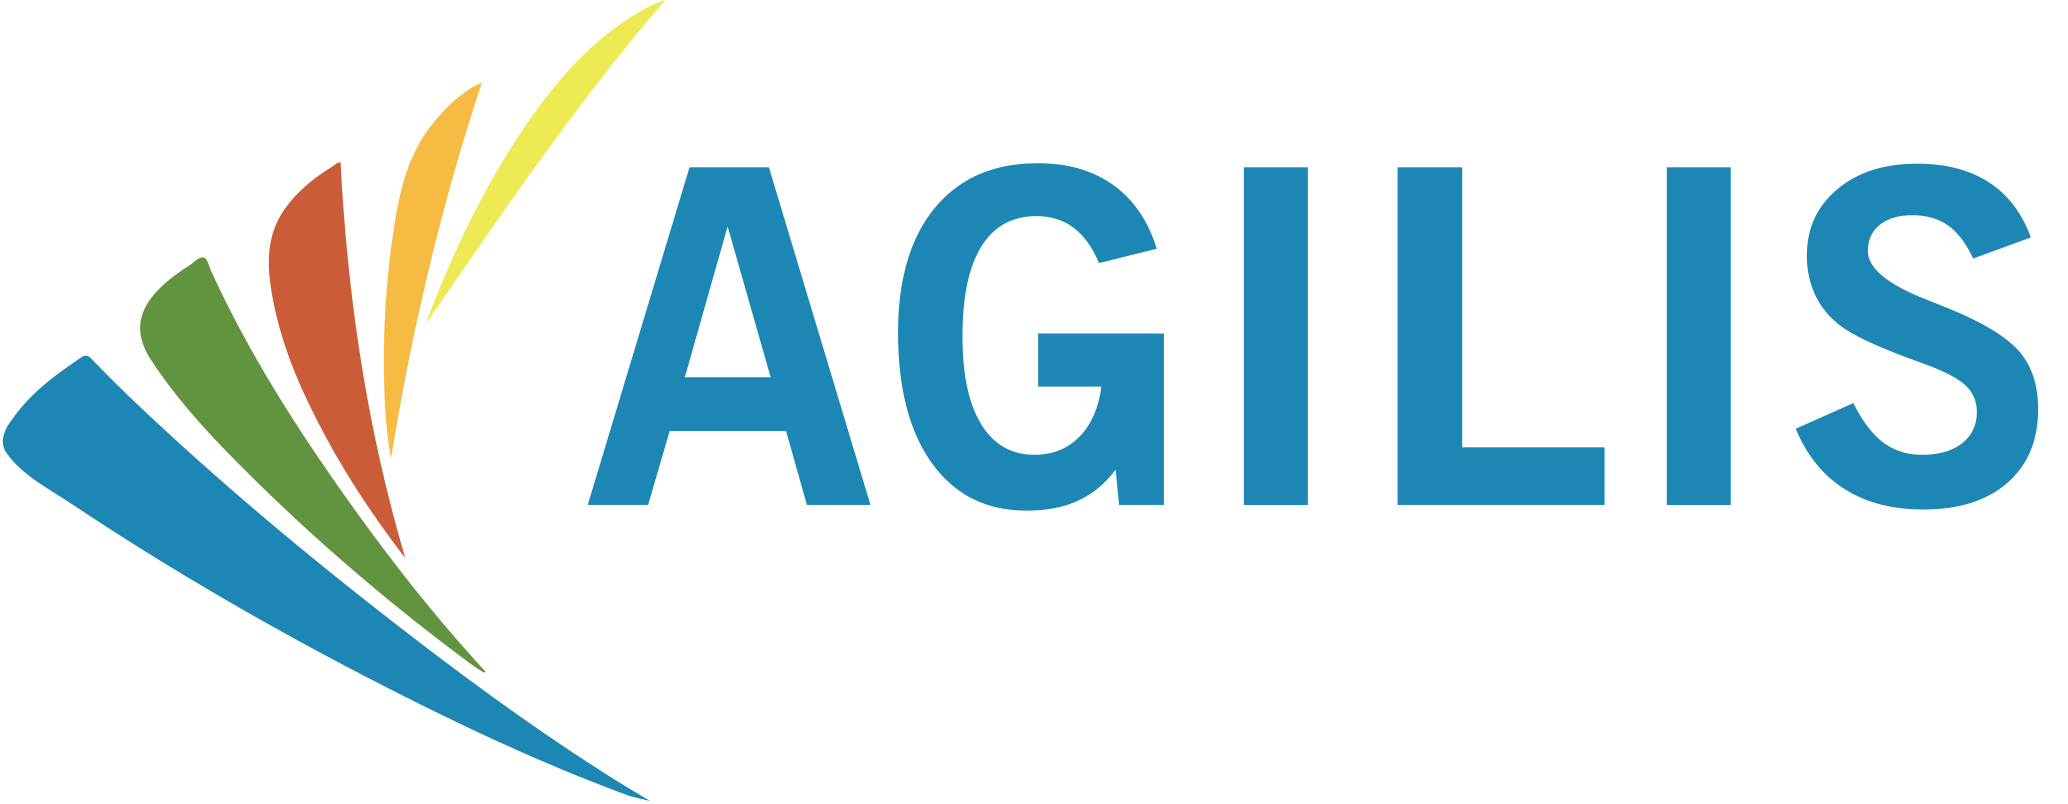 Chemicals Logo - Commerce Platform for the chemical industry